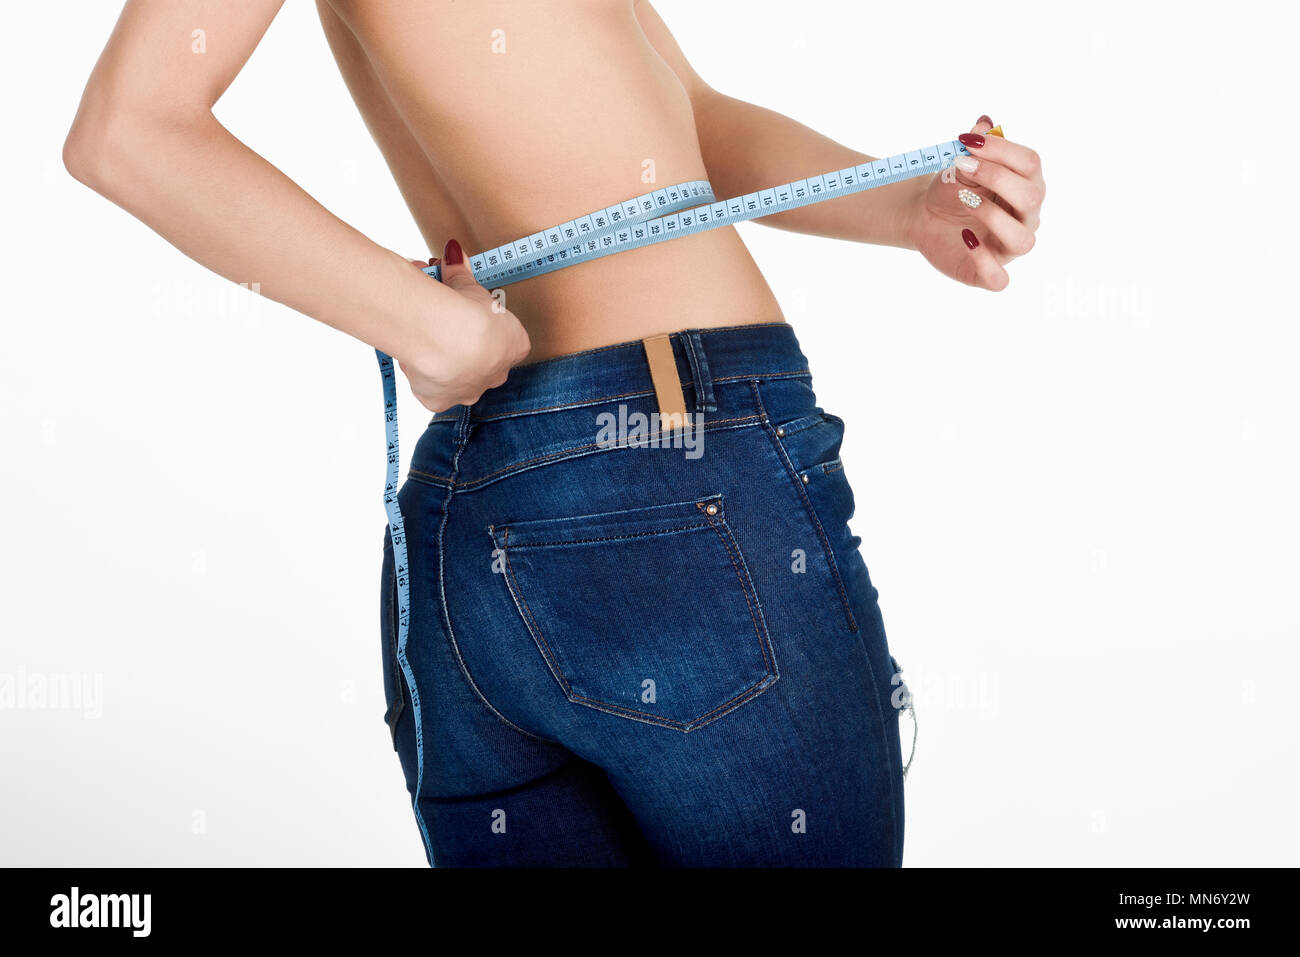 Woman Measuring Tape Lose Weight Health Diet Waist Size Isolated Stock  Photo by ©PeopleImages.com 657363578